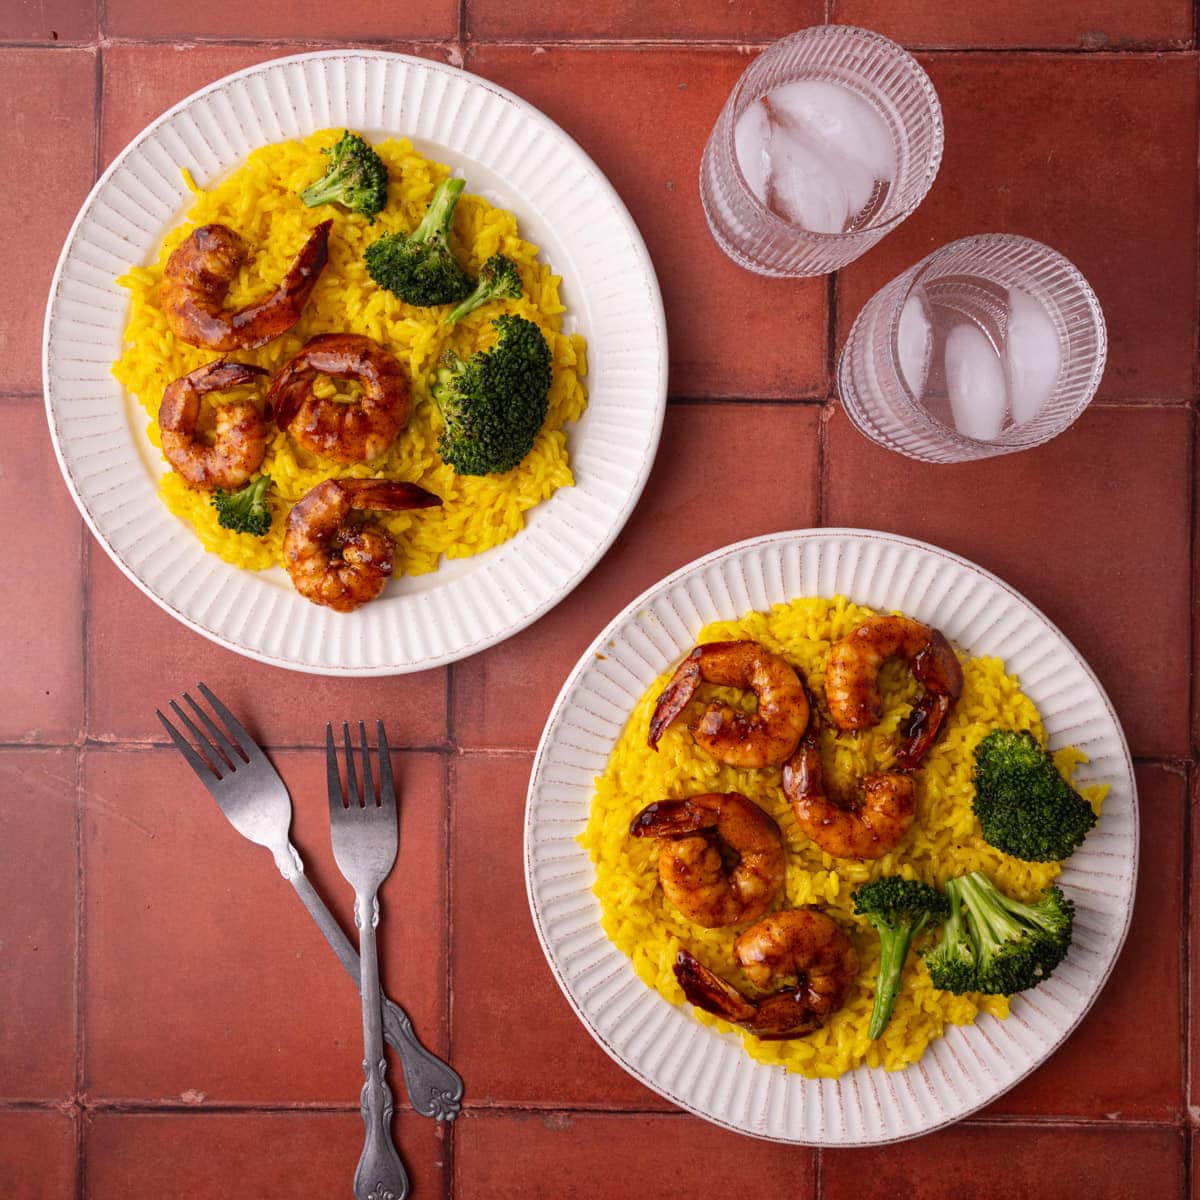 Tequila lime shrimp served with yellow rice and broccoli.